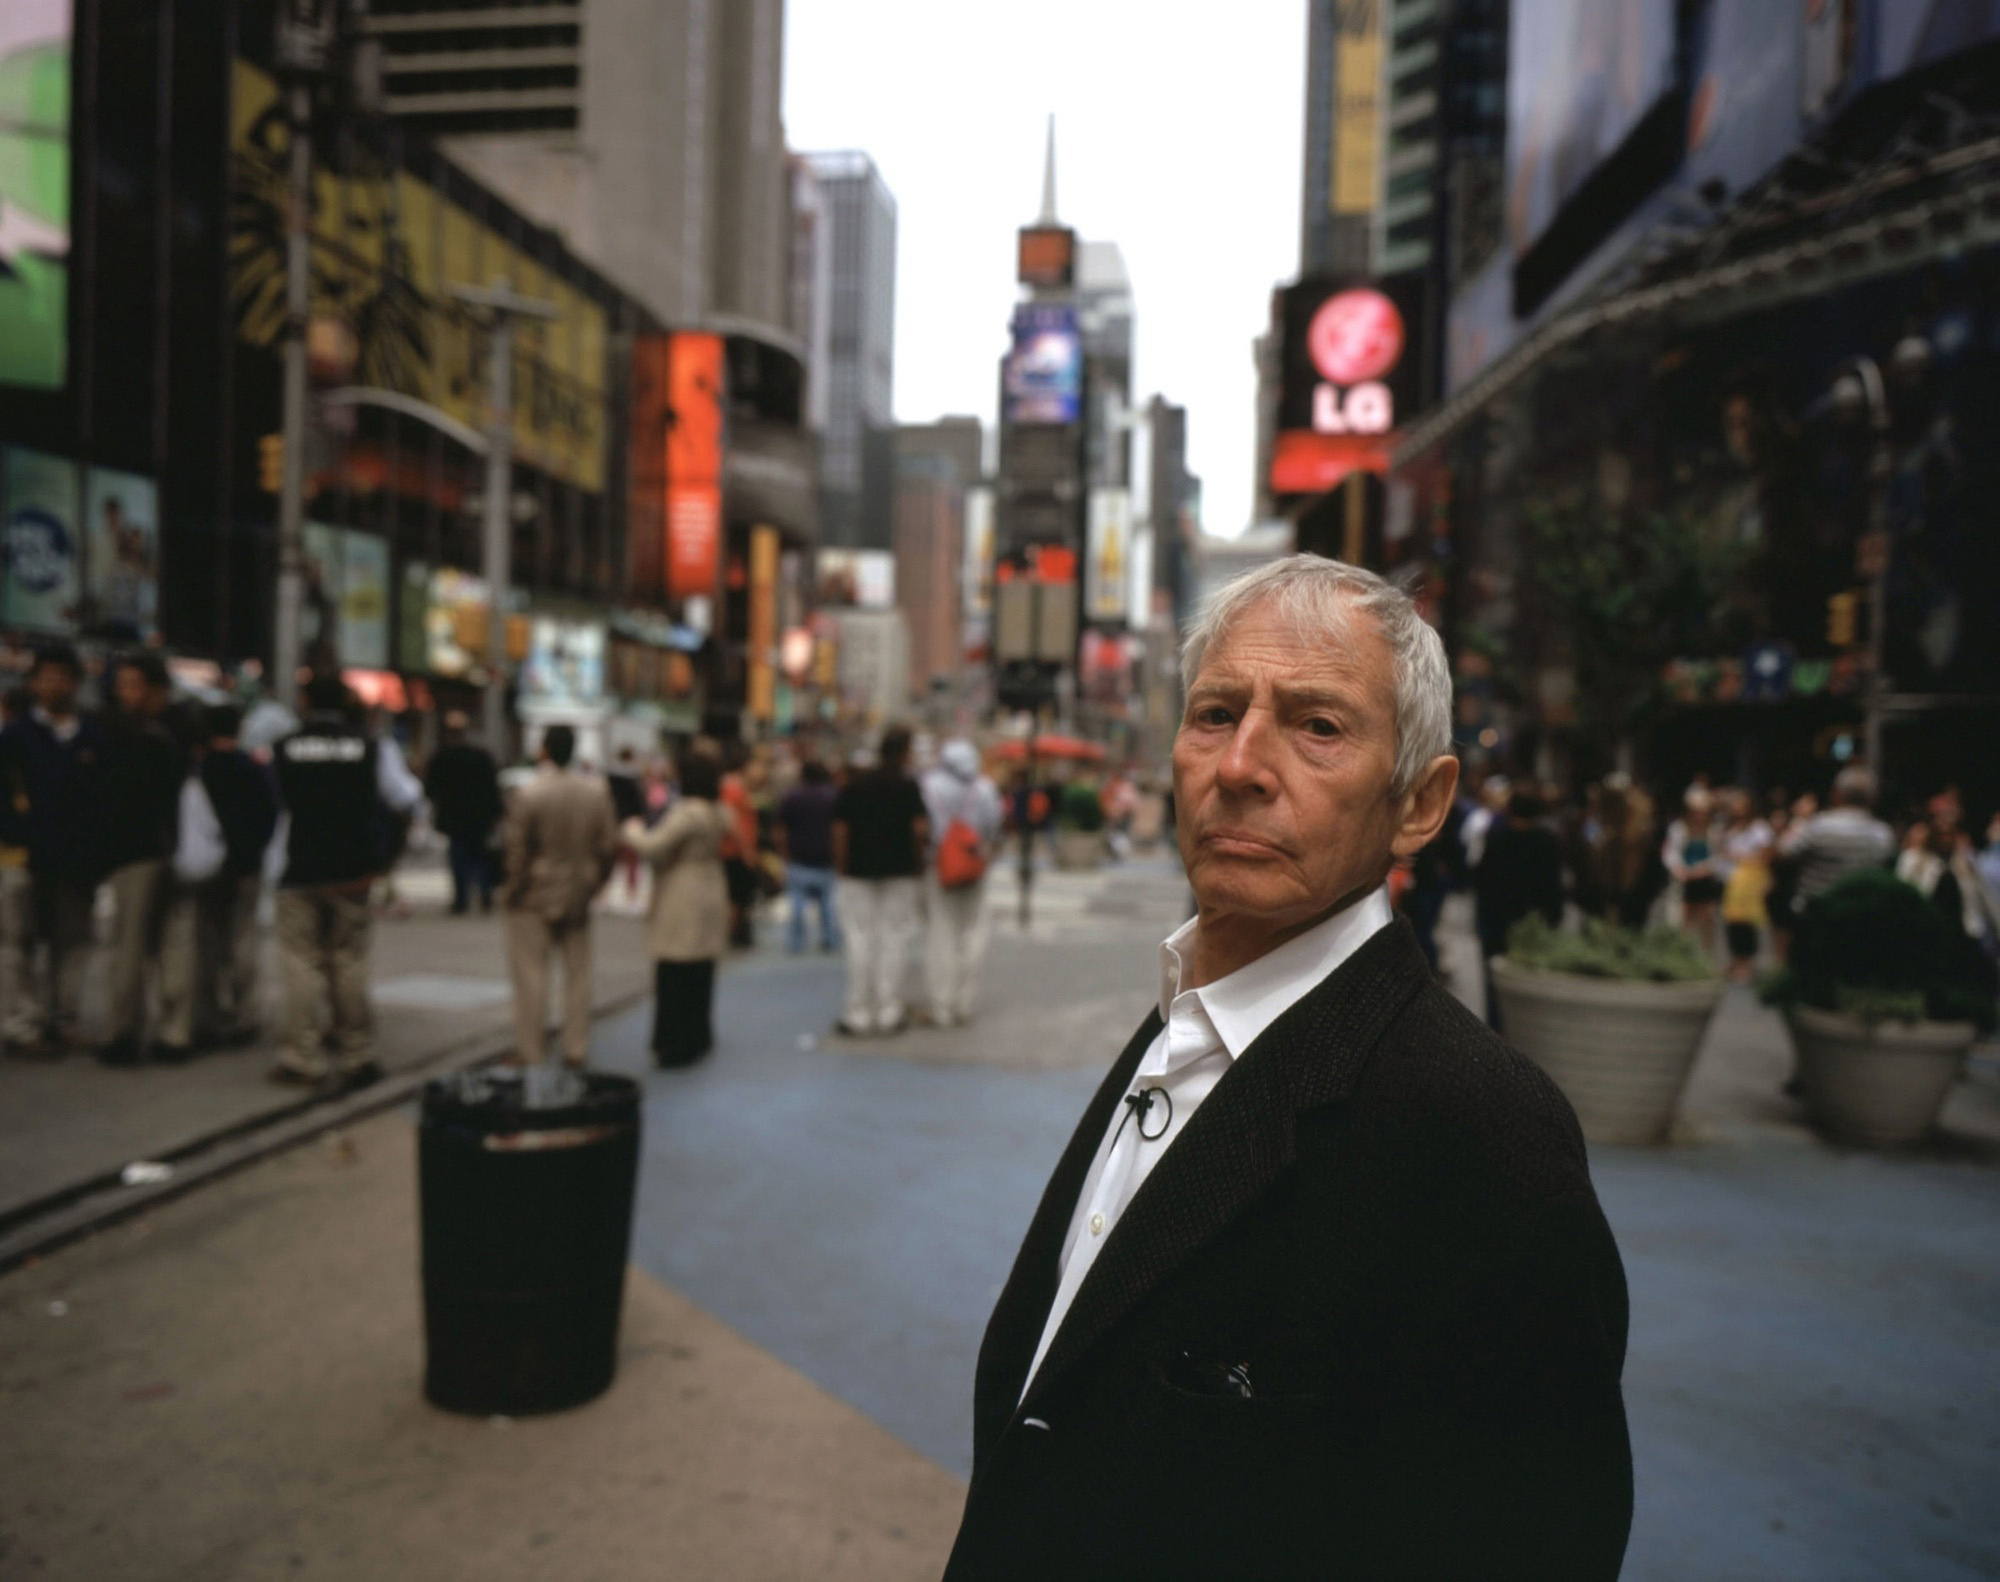 PHOTO: Robert Durst is the subject of a six-part HBO series "The Jinx: The Life and Deaths of Robert Durst."